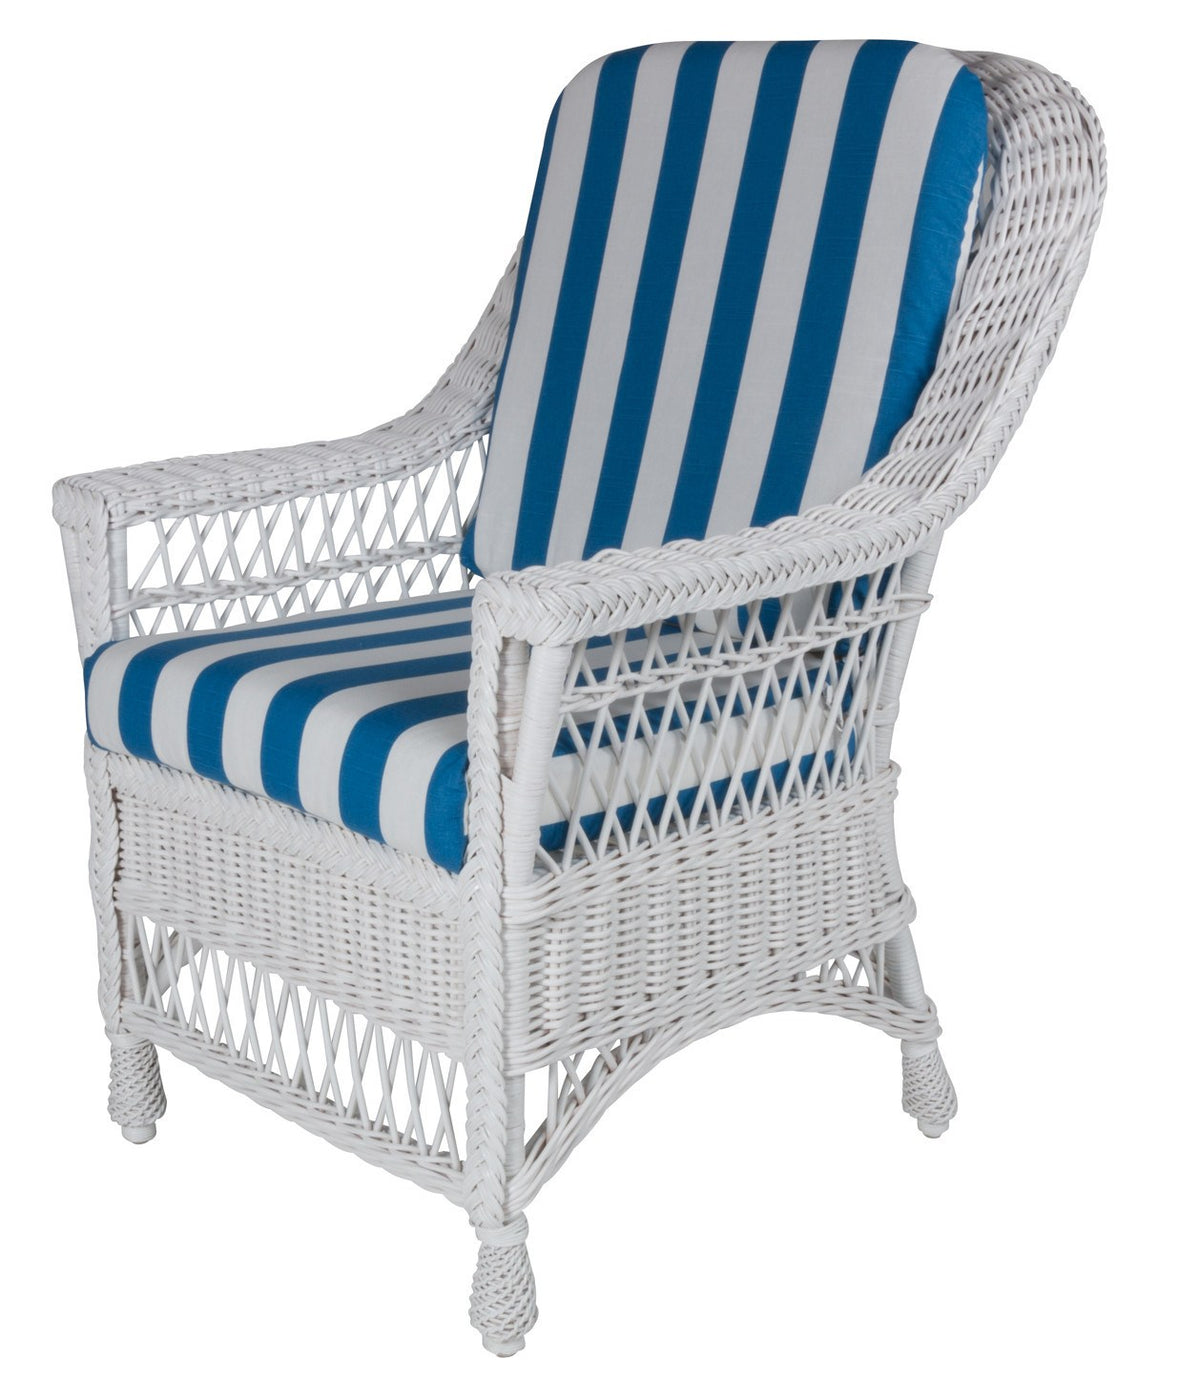 Designer Wicker &amp; Rattan By Tribor Harbor Front Dining Arm Chair by Designer Wicker from Tribor Dining Chair - Rattan Imports